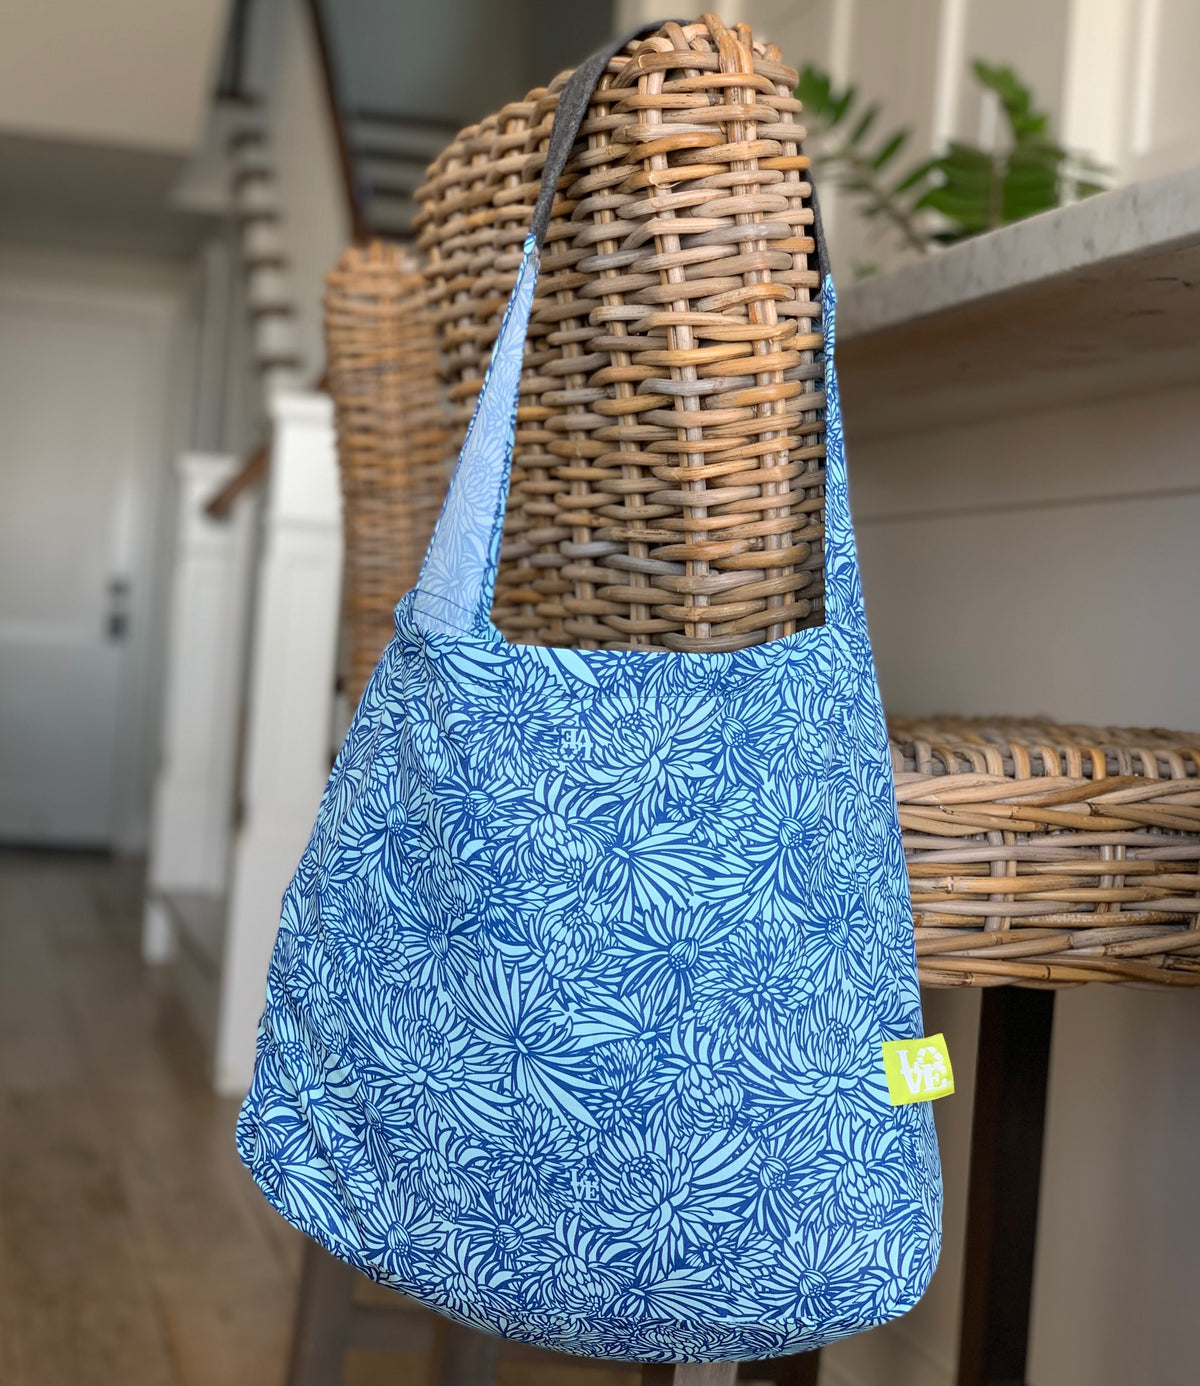 Stash It Tote Bag - Mums The Word